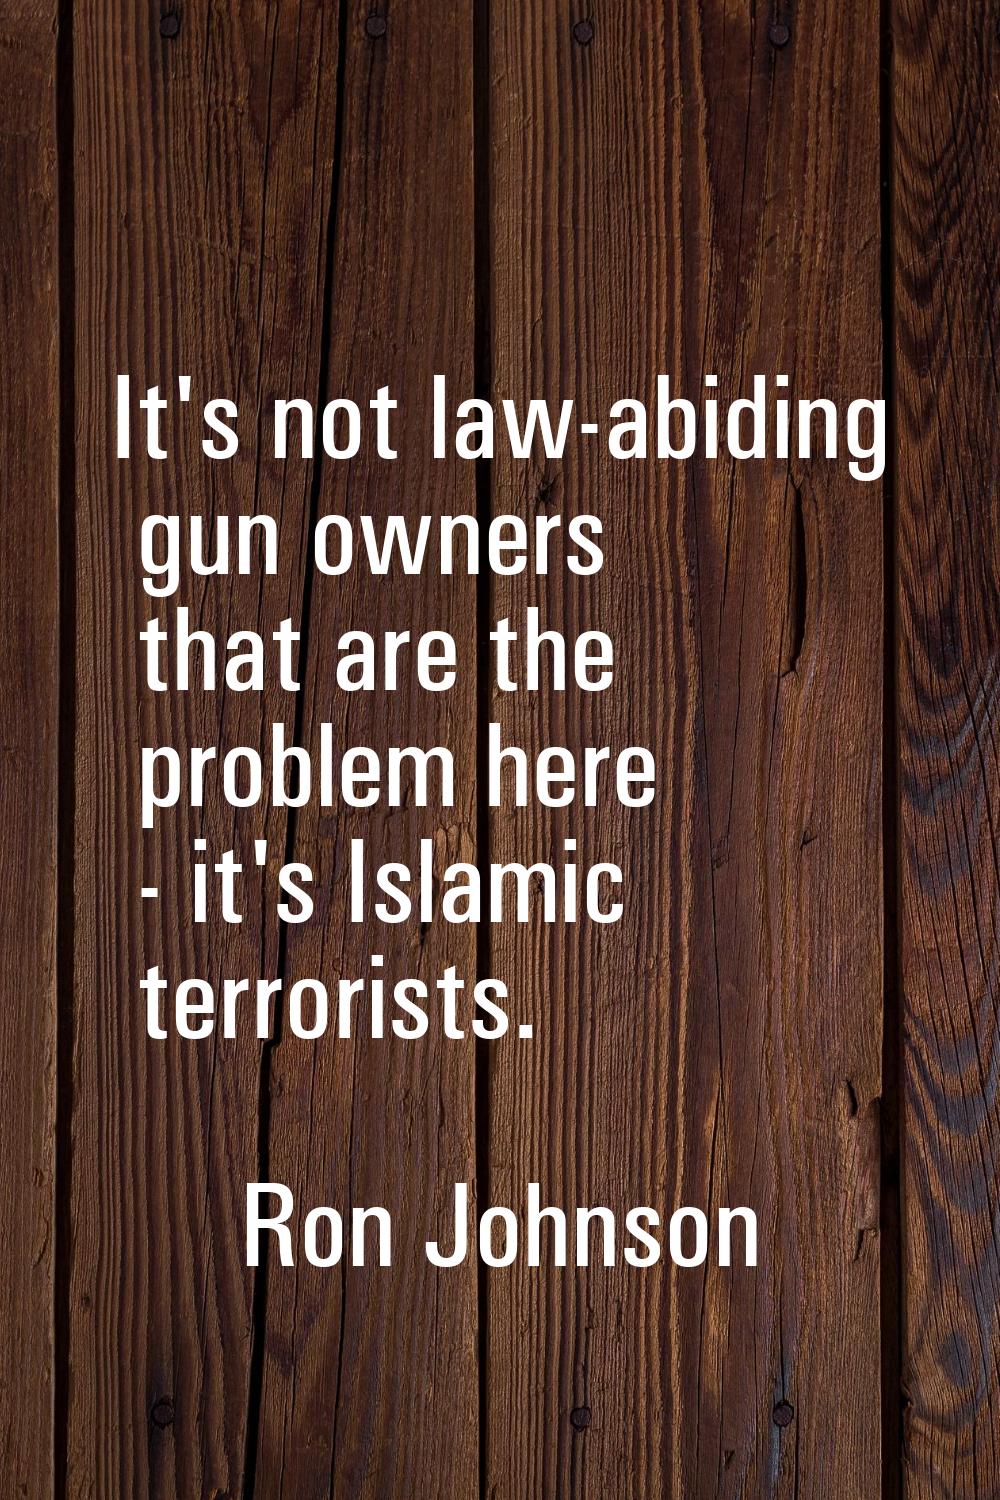 It's not law-abiding gun owners that are the problem here - it's Islamic terrorists.